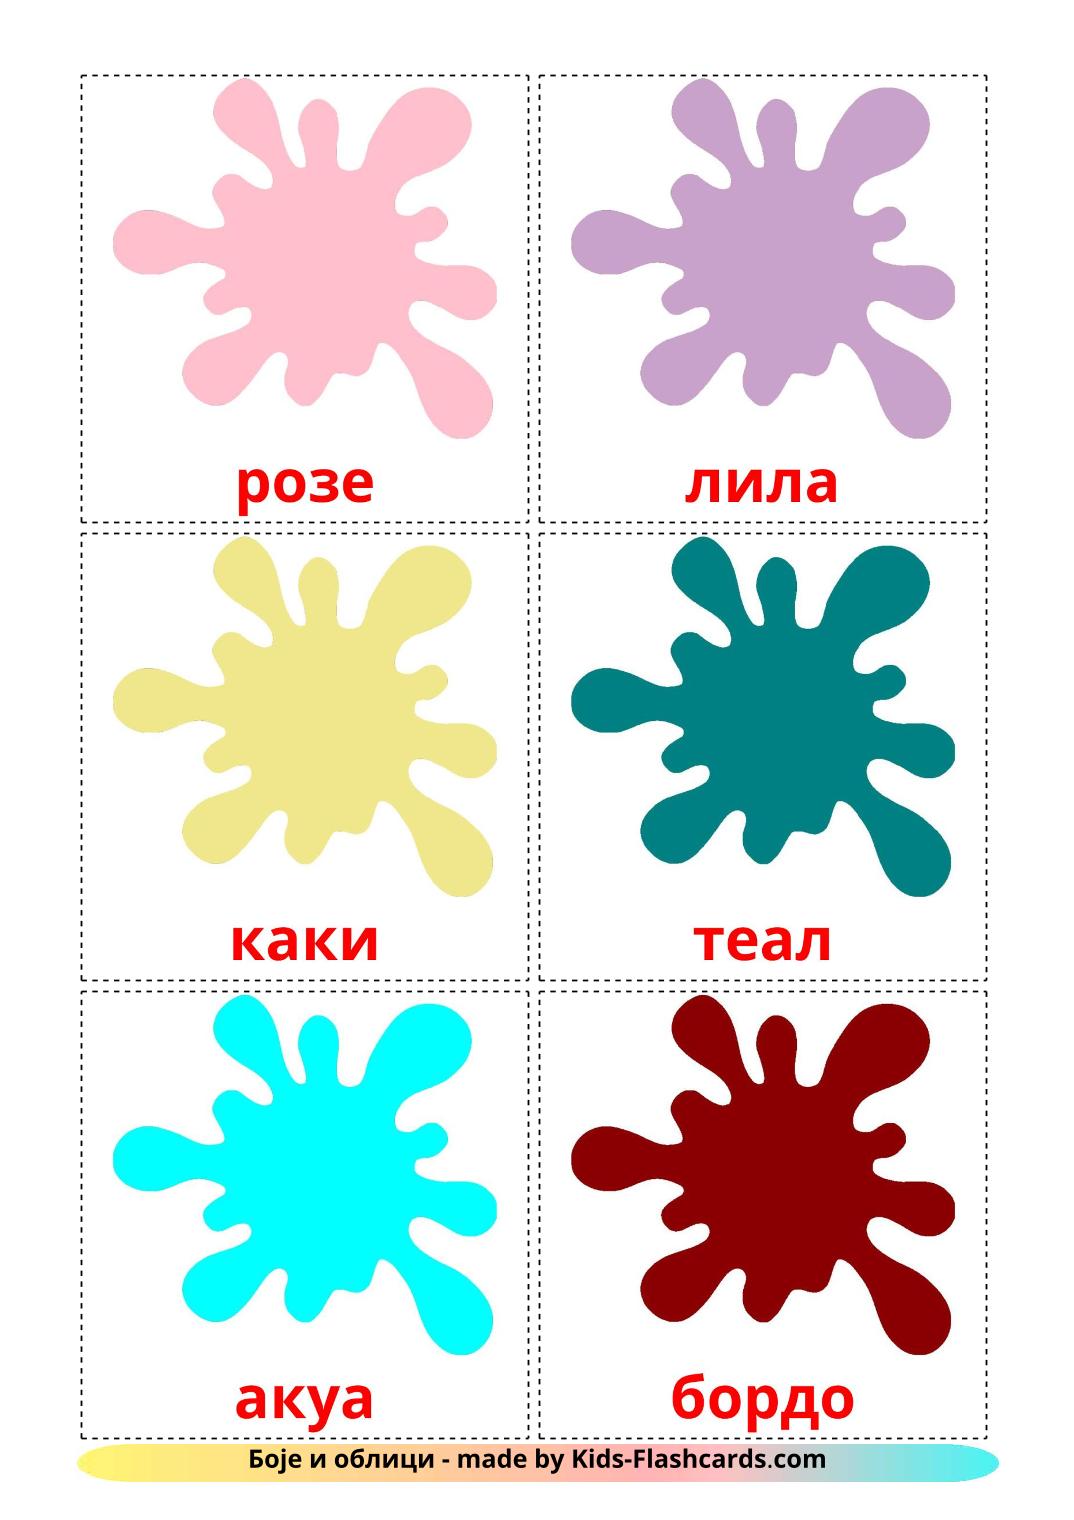 Secondary colors - 20 Free Printable serbian(cyrillic) Flashcards 